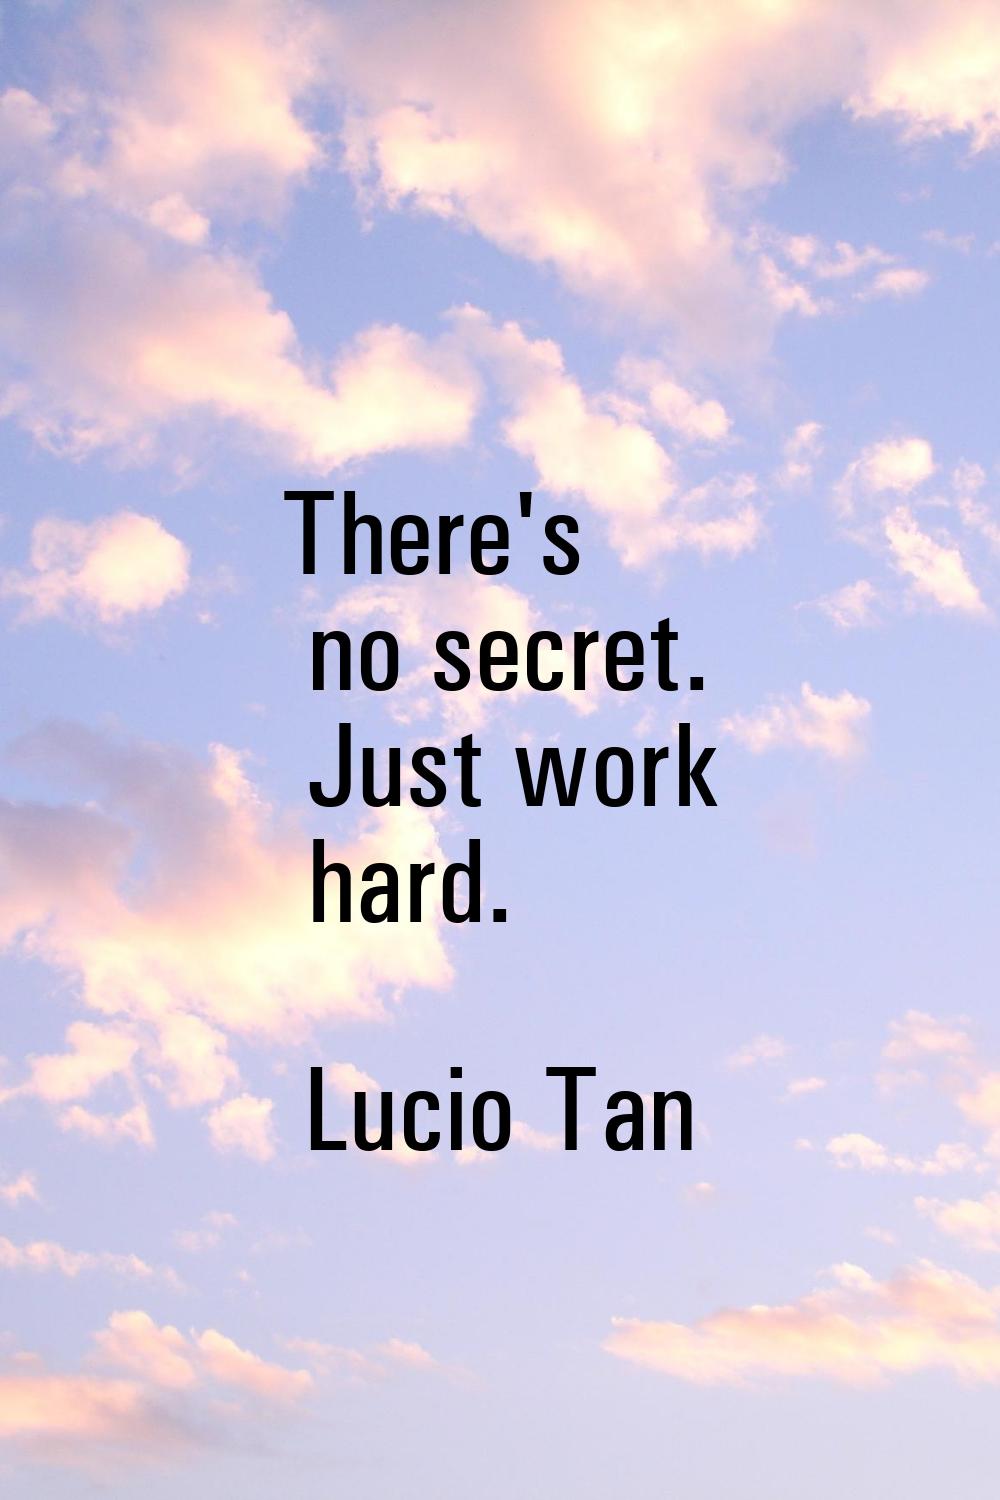 There's no secret. Just work hard.